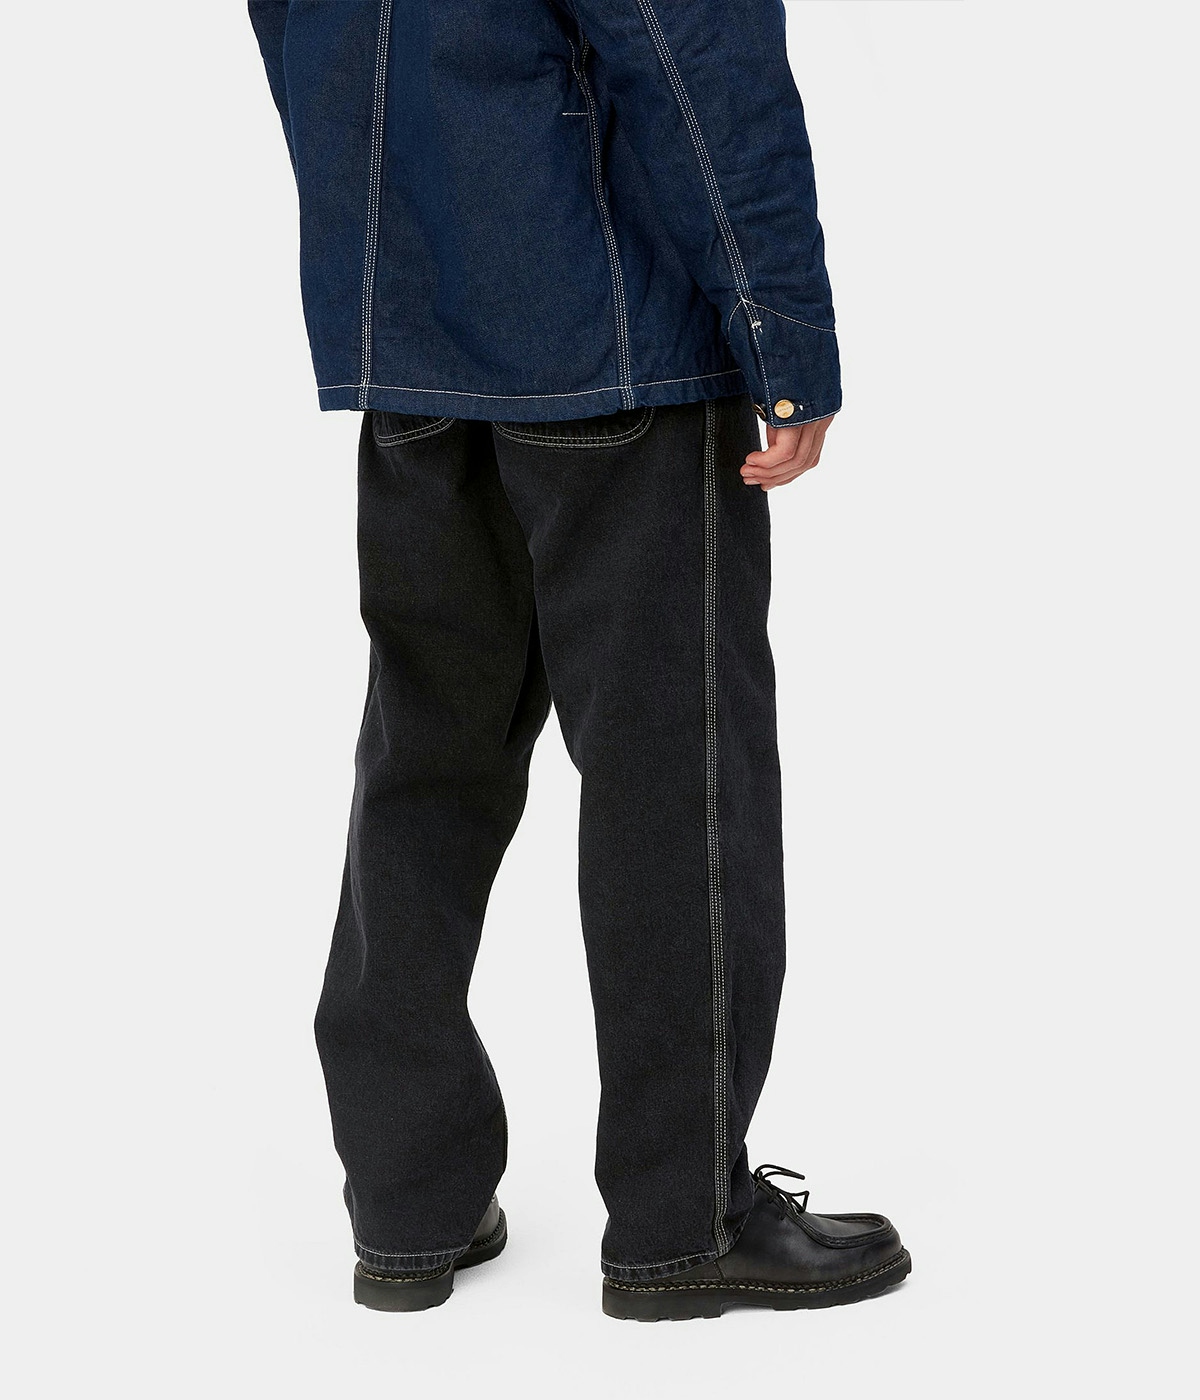 Carhartt Pant Simple Black/Stone washed 2